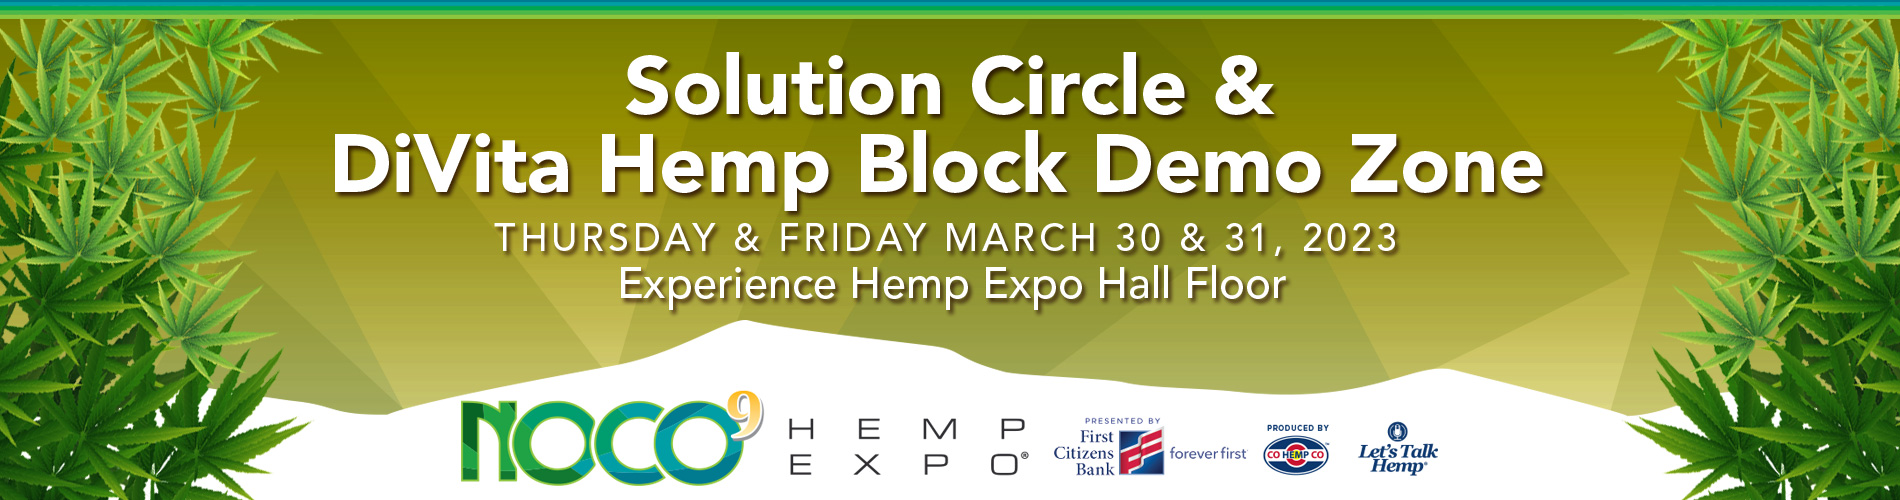 Solution Circle and Demo Stage